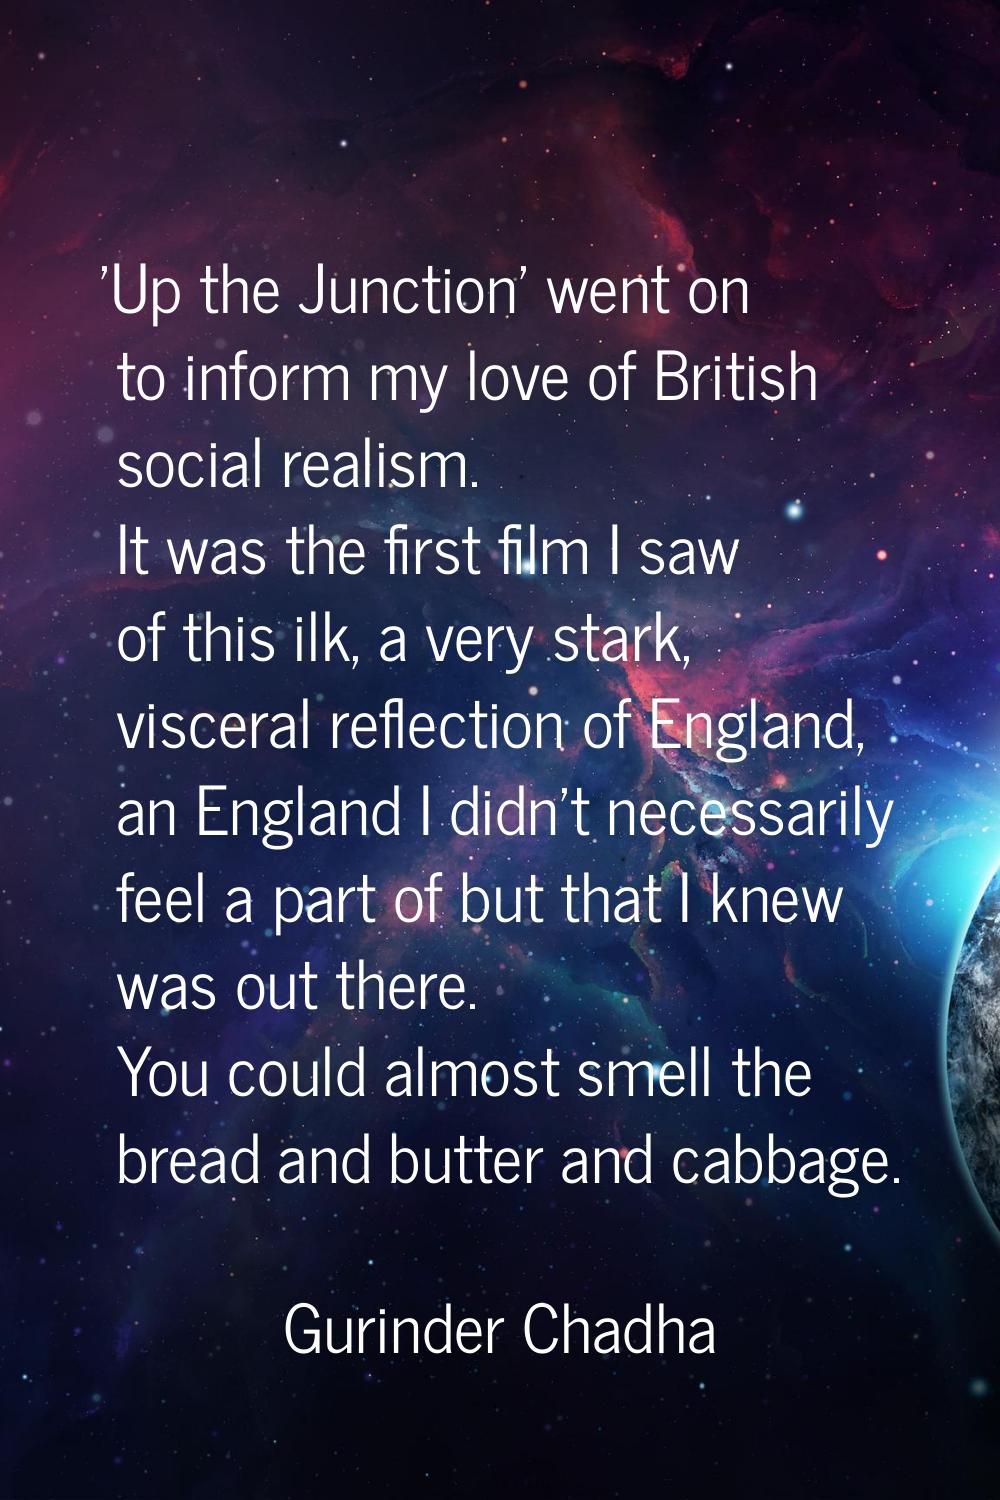 'Up the Junction' went on to inform my love of British social realism. It was the first film I saw 